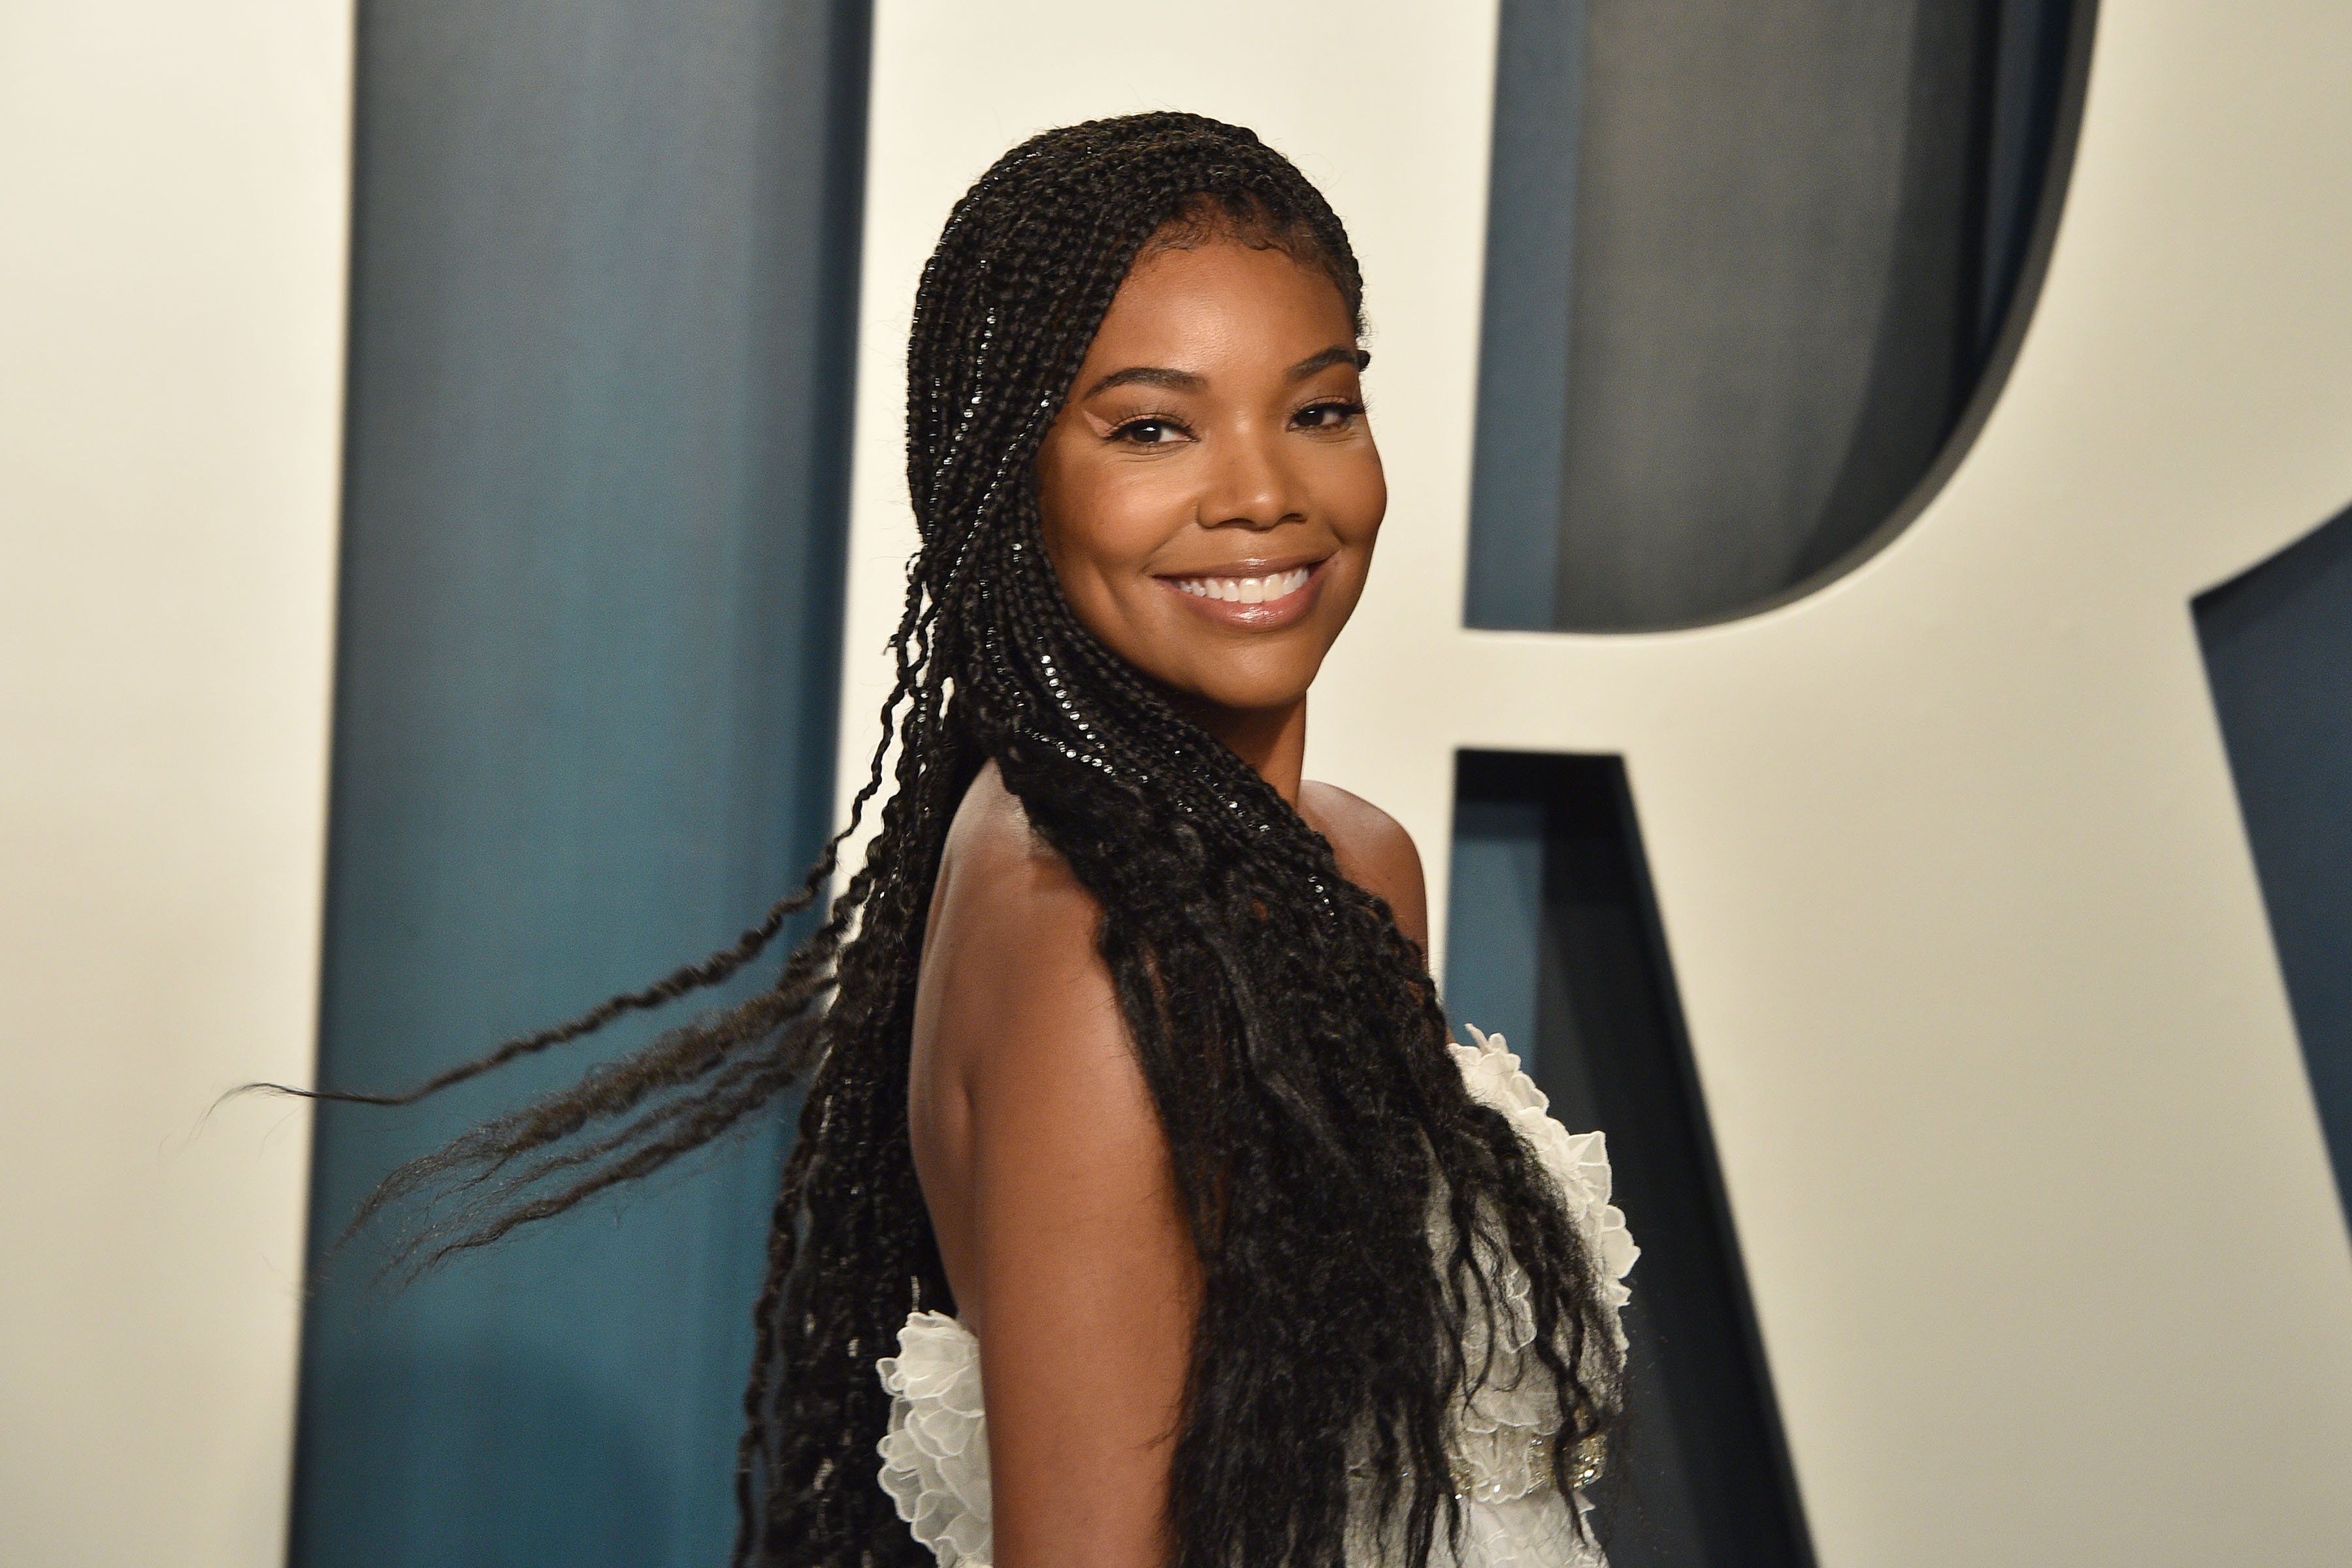 Gabrielle Union poses at the 2020 Vanity Fair Oscar Party at Wallis Annenberg Center for the Performing Arts on February 09, 2020 in Beverly Hills, California | Photo: Getty Images